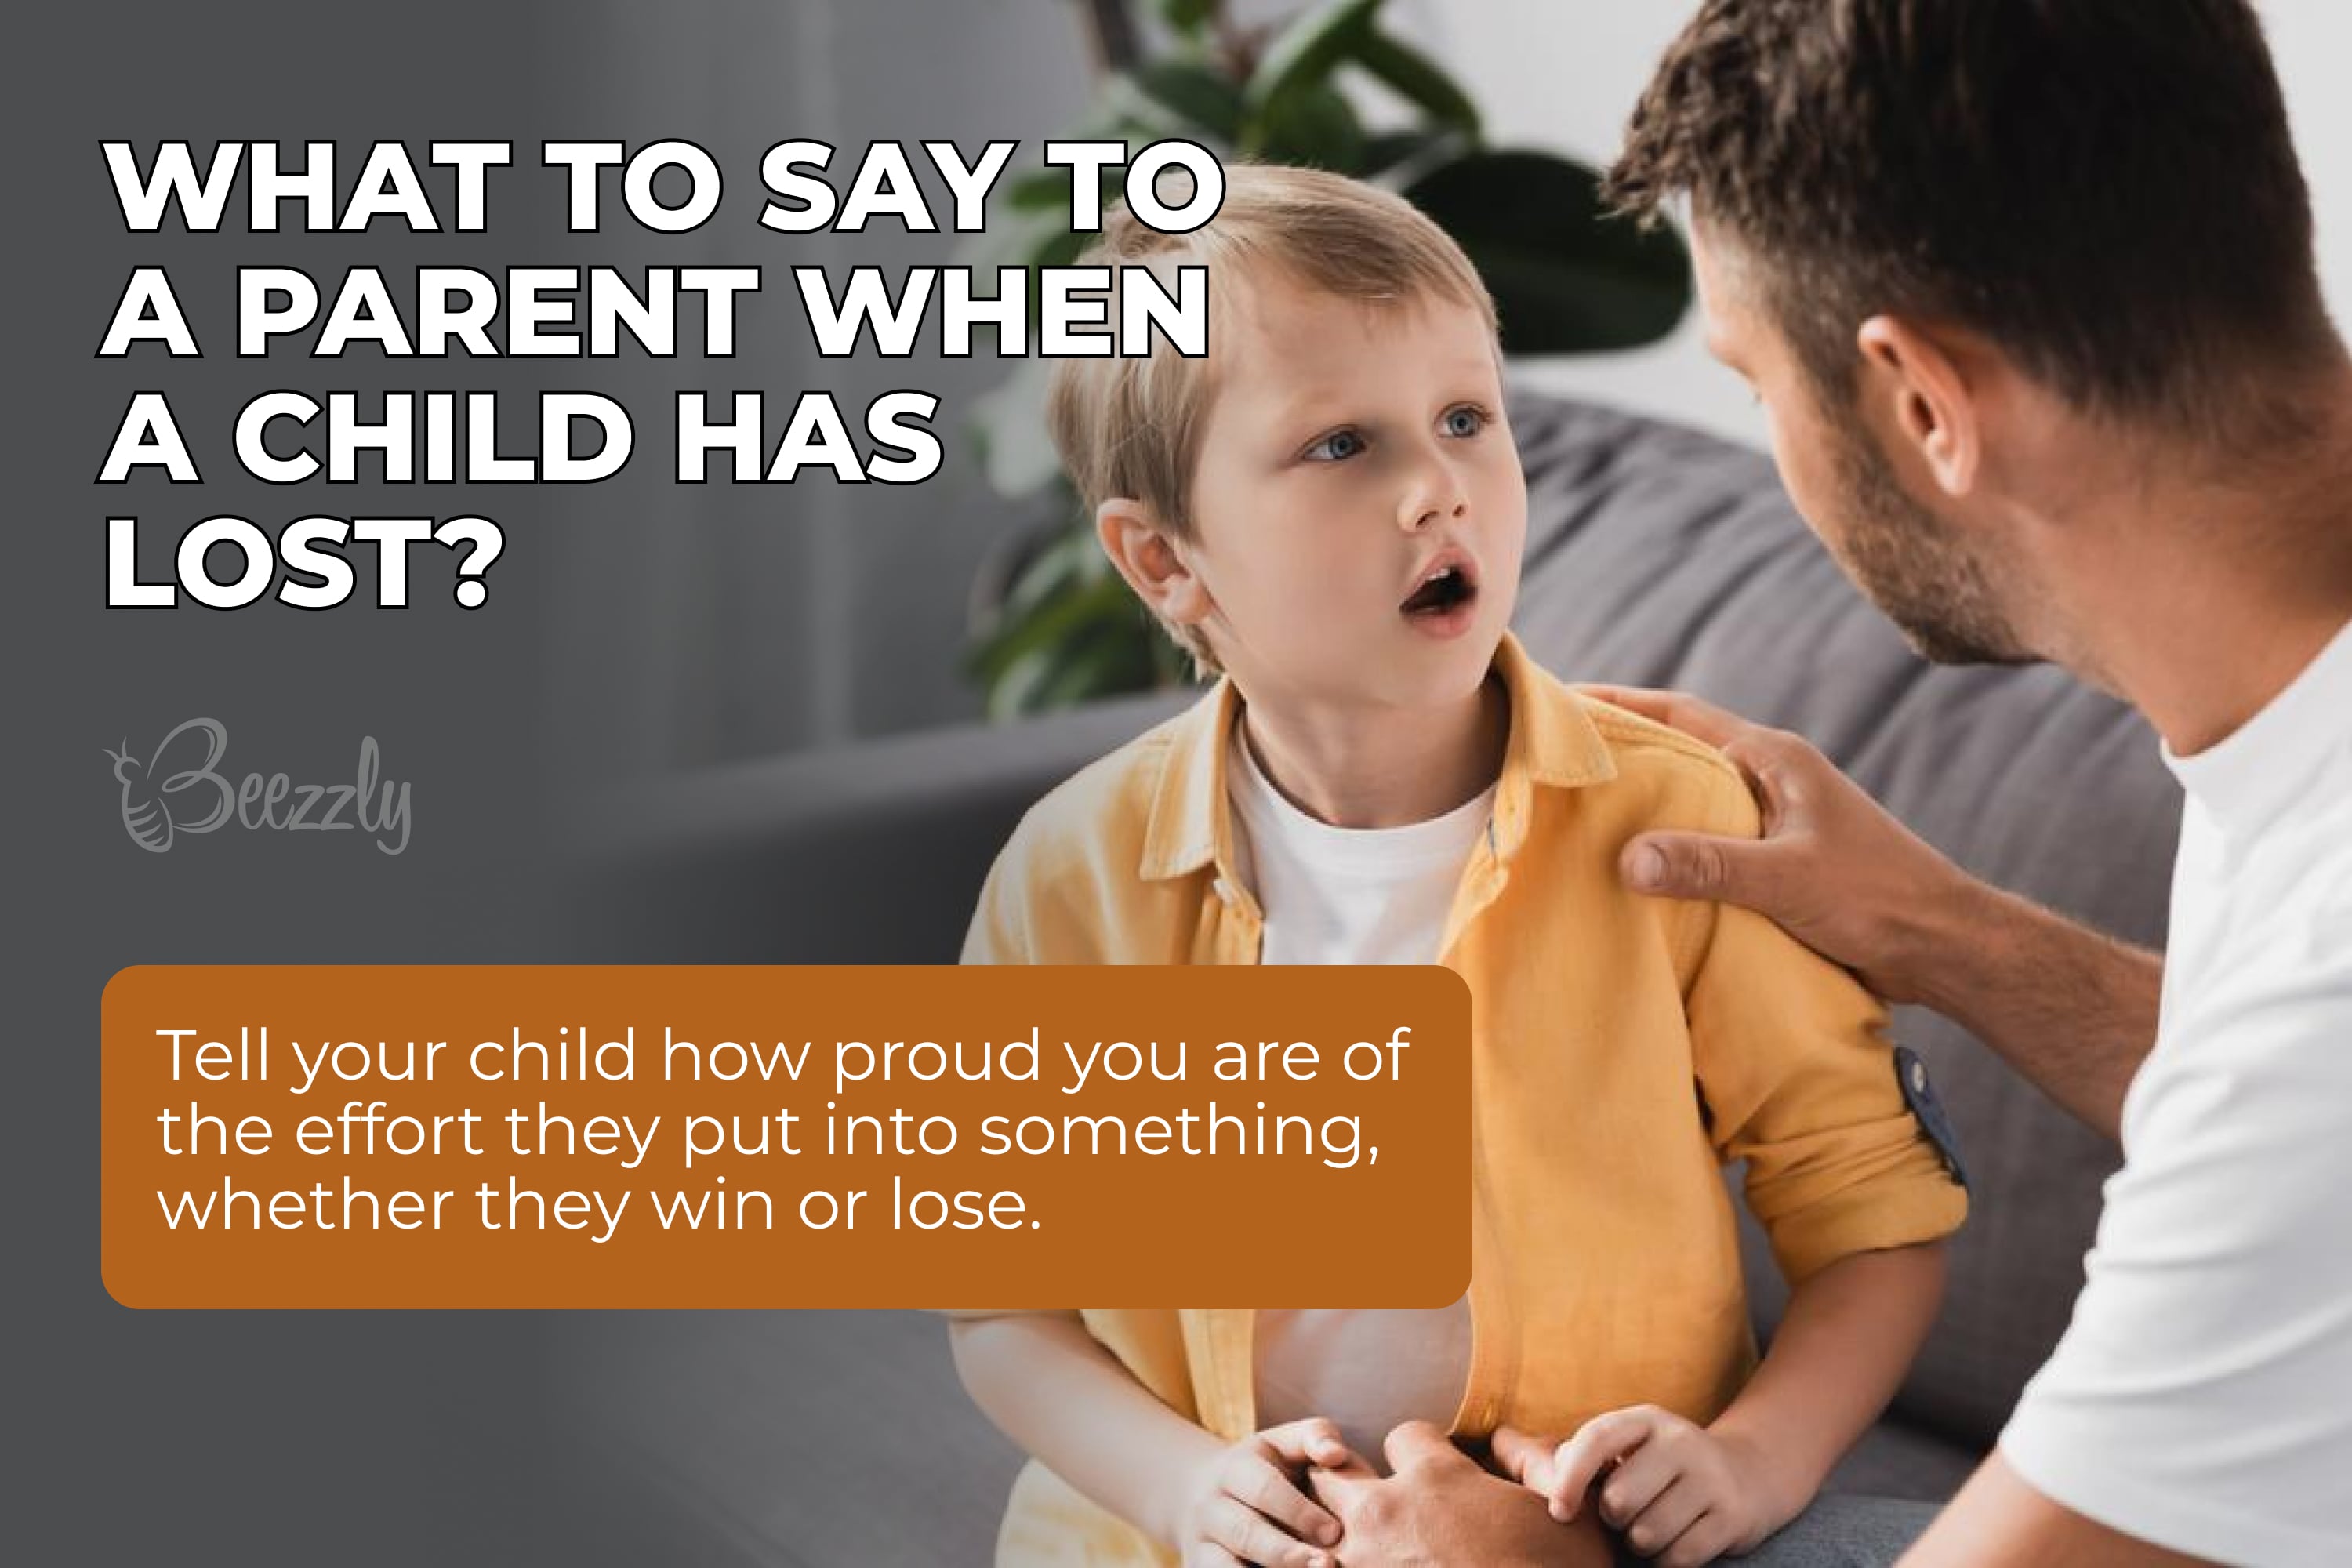 What to say to a parent when a child has lost